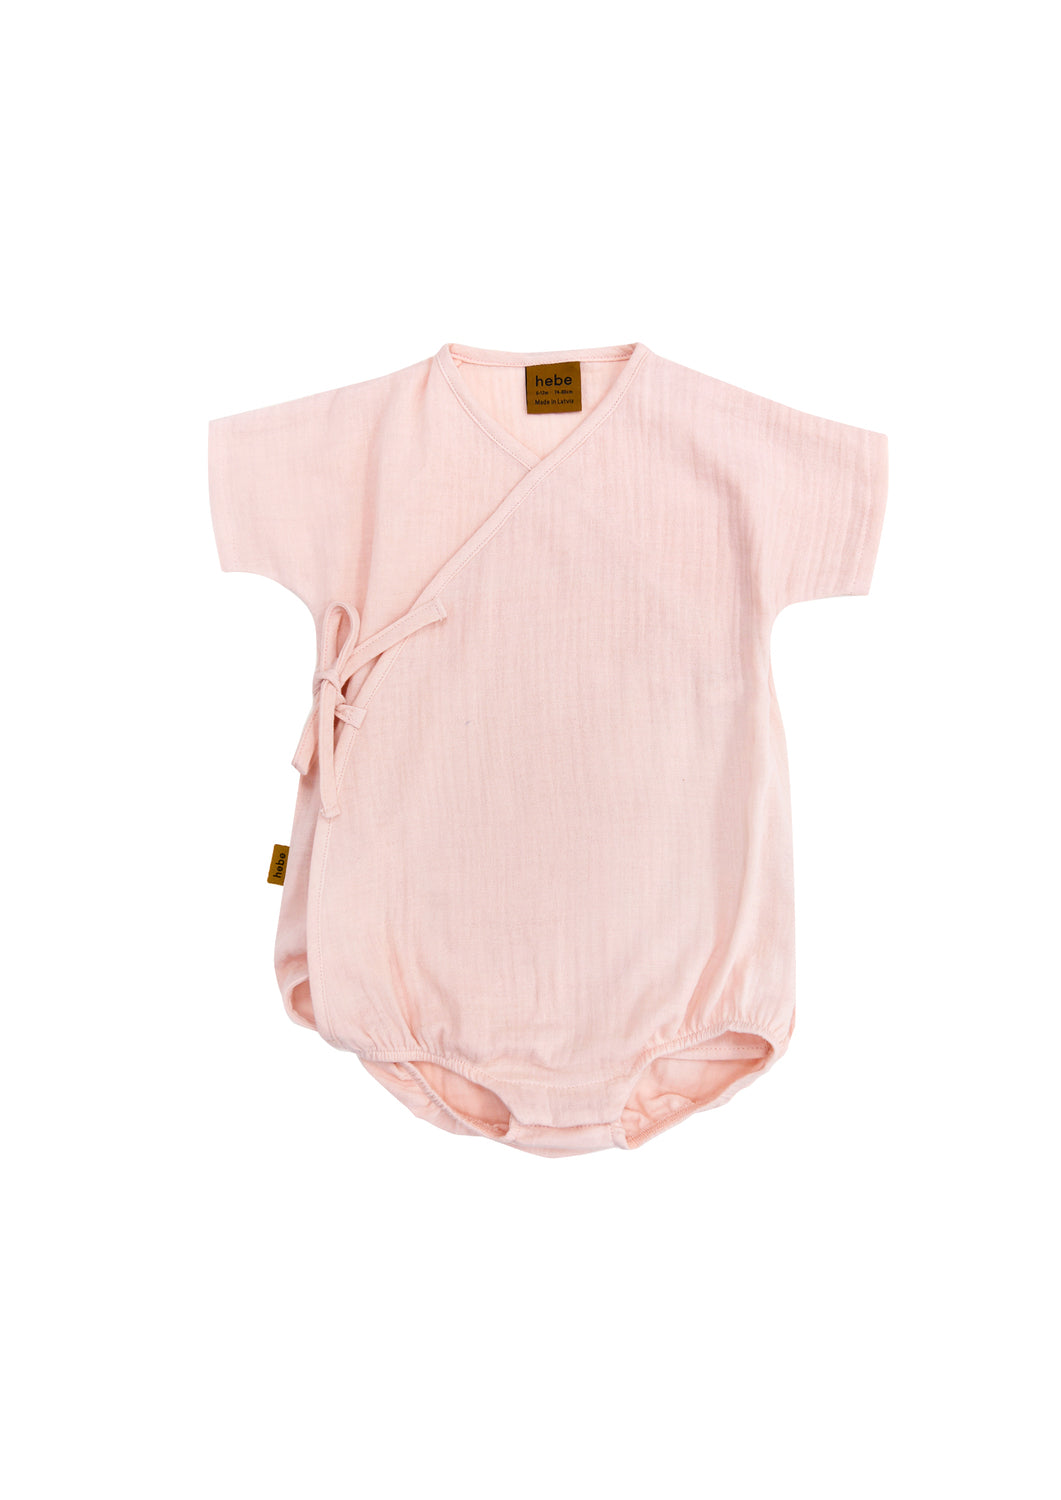 Shop the breathable pink muslin wrap body is perfect for summer weather. This baby girl romper can be adjusted for thingness and comes with snap bottom's at bottom for easy wear. This pink baby romper is made from muslin which is the perfect choice for baby clothing during summer. Shop the best baby clothing online.